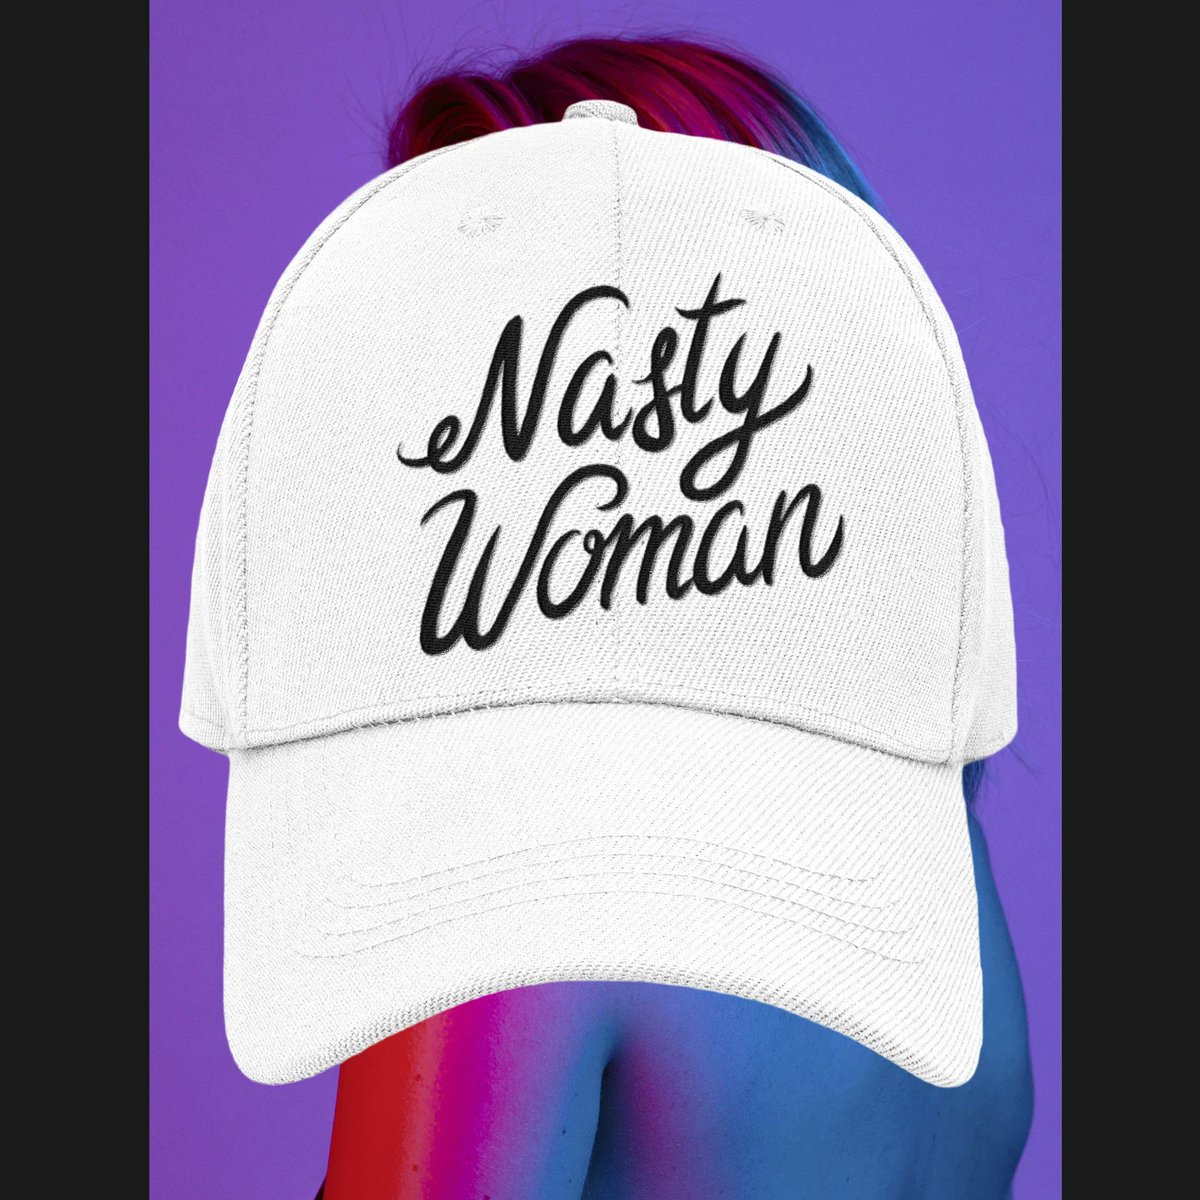 Nasty Woman: Make a Bold Statement with Our Cotton Twill Hats 

hatsline.com/product/nasty-…
-
-
-
#hatsline #hatslinecom #womans #woman #nasty #gift #hats #hat #custom #sale #womanshat #NastyWoman #FierceFemales #EmpoweredWomen #GirlPower #UnapologeticallyMe #Feminism...